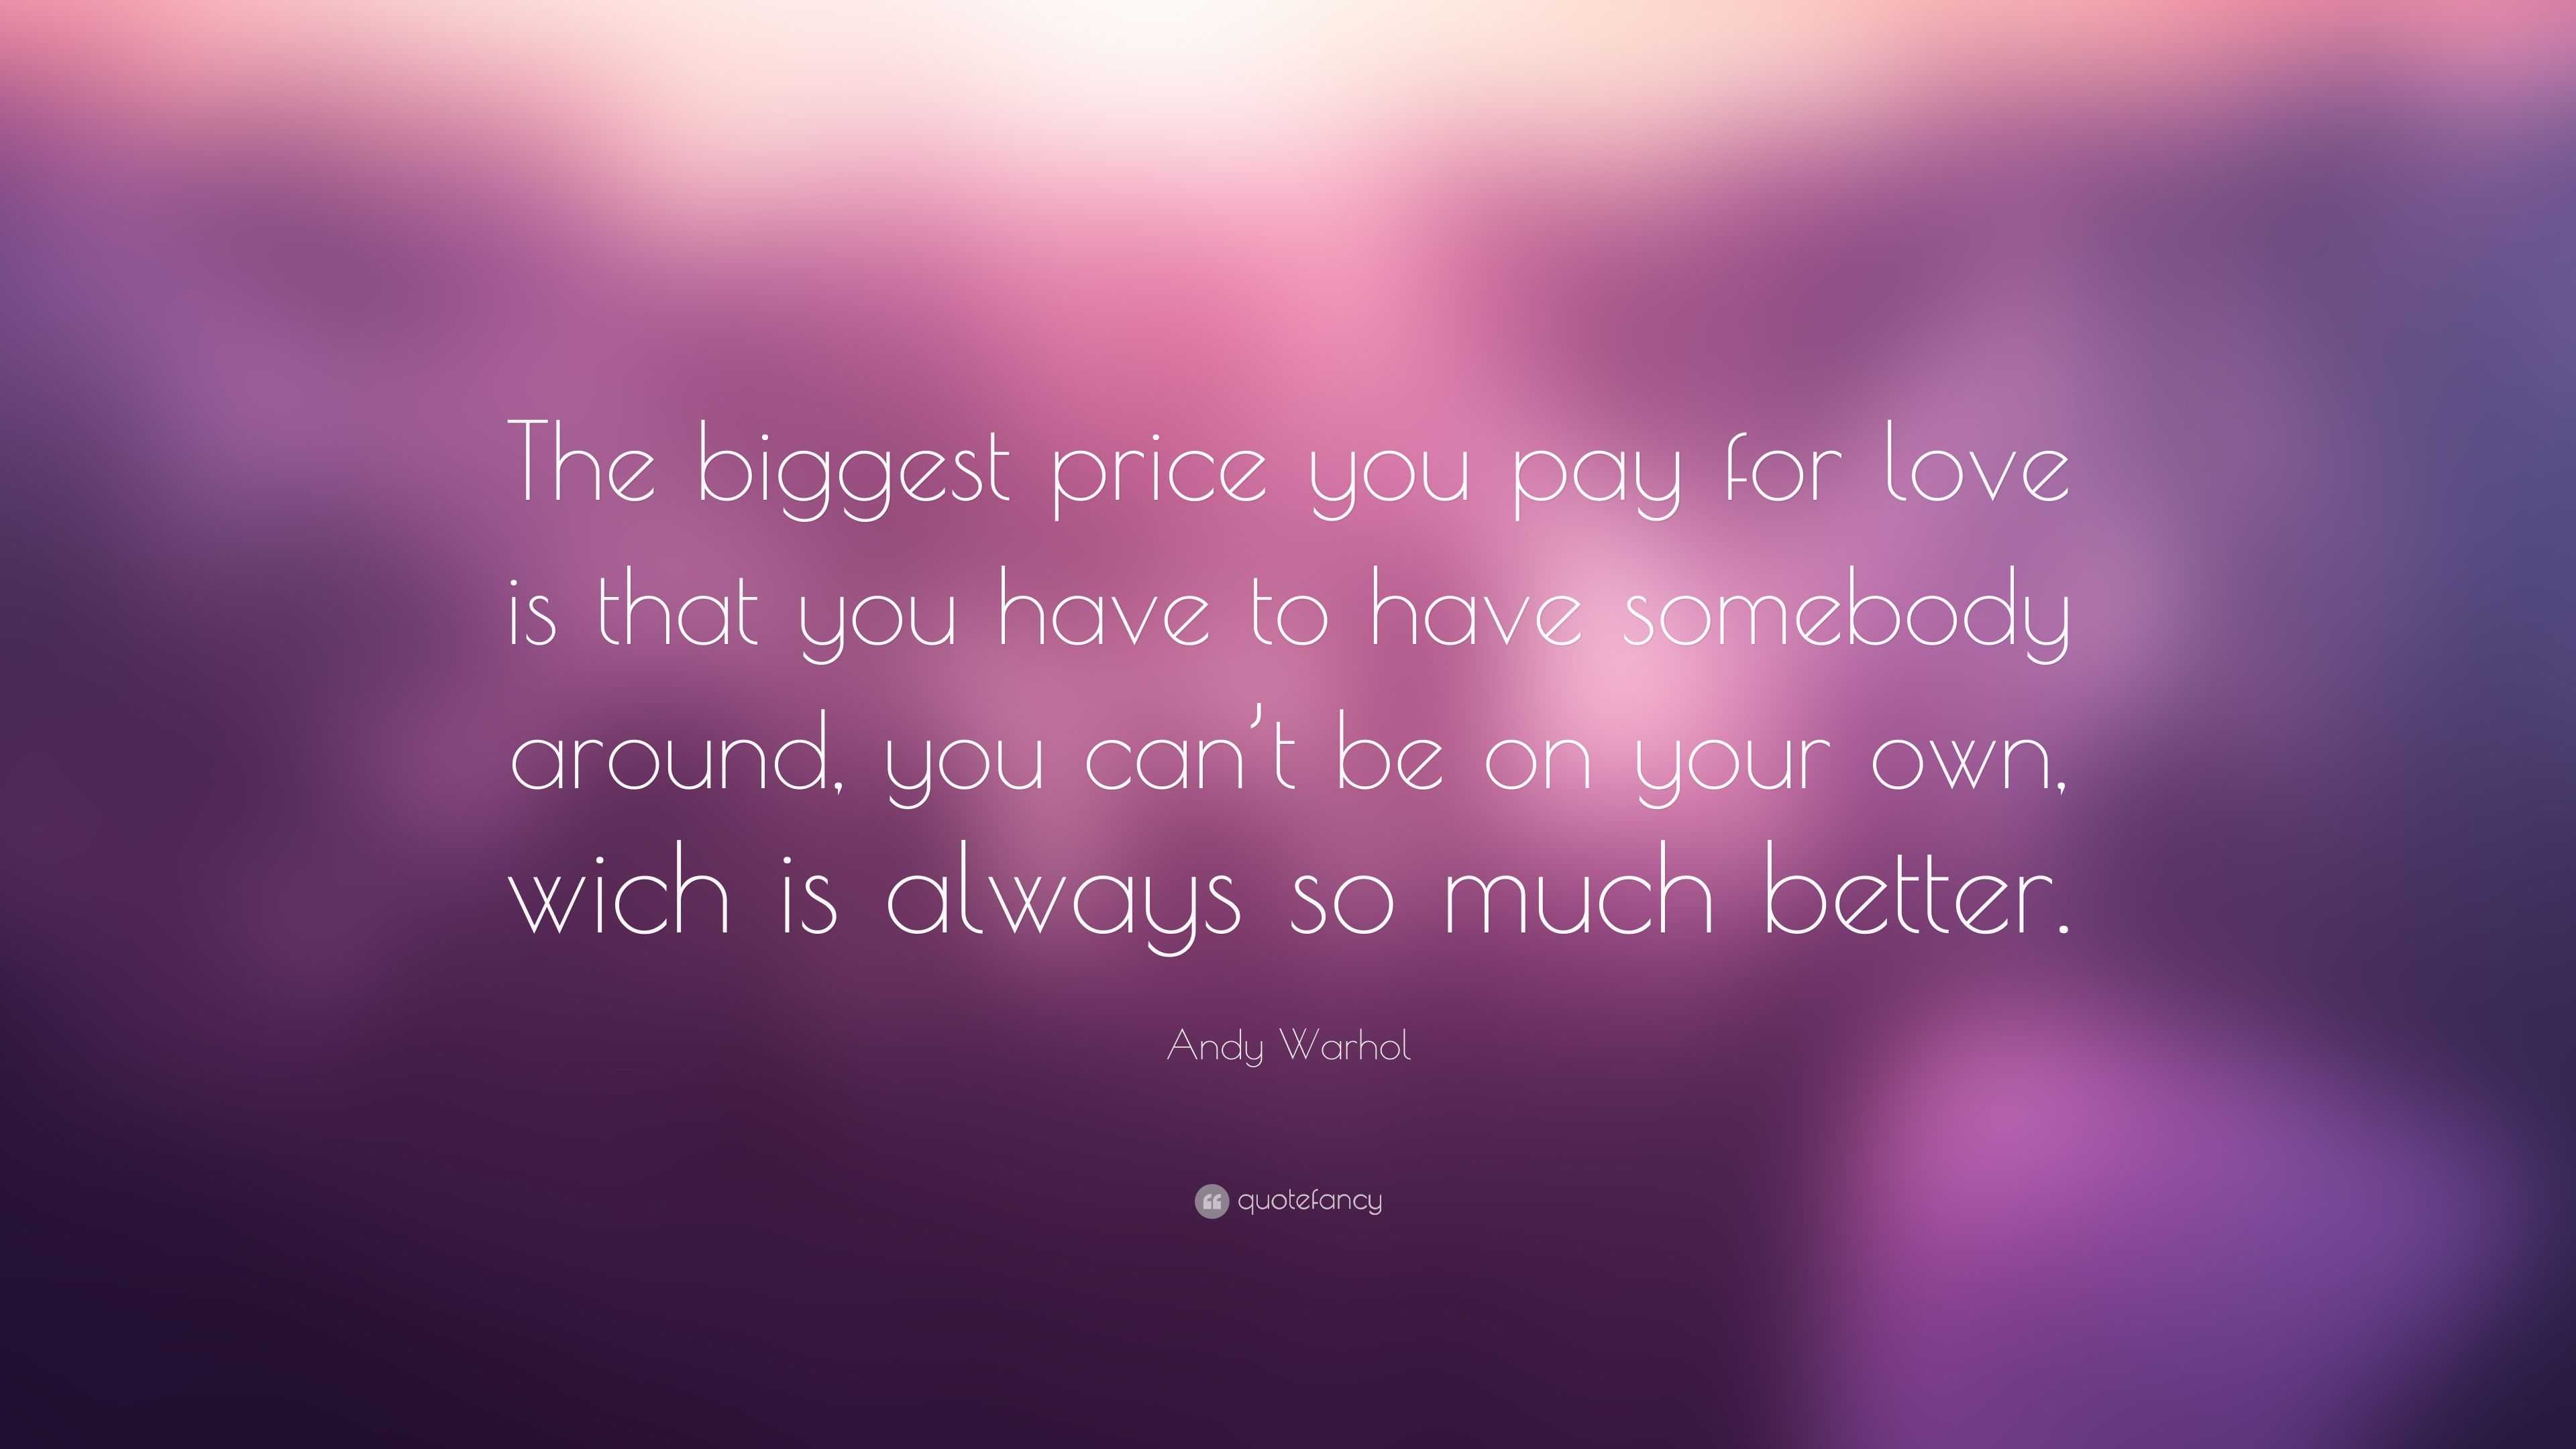 Andy Warhol Quote: “The biggest price you pay for love is that you have ...